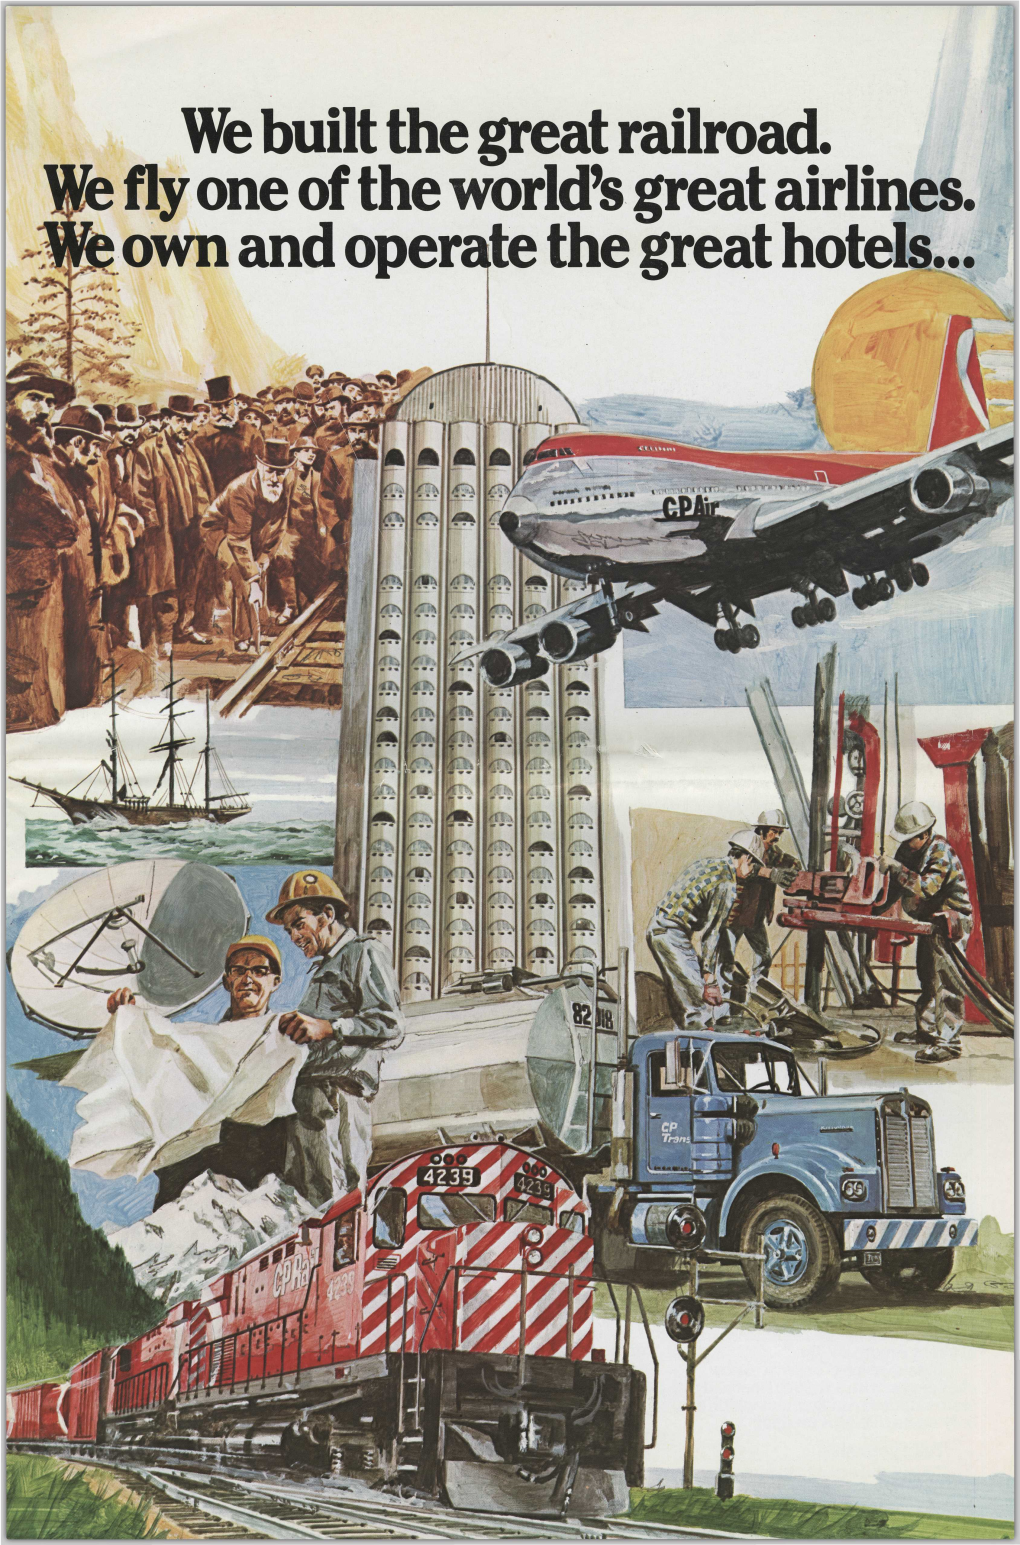 We Built the Great Railroad Fly One of the World's Great Airlines, Own and Operate the Great Hotels